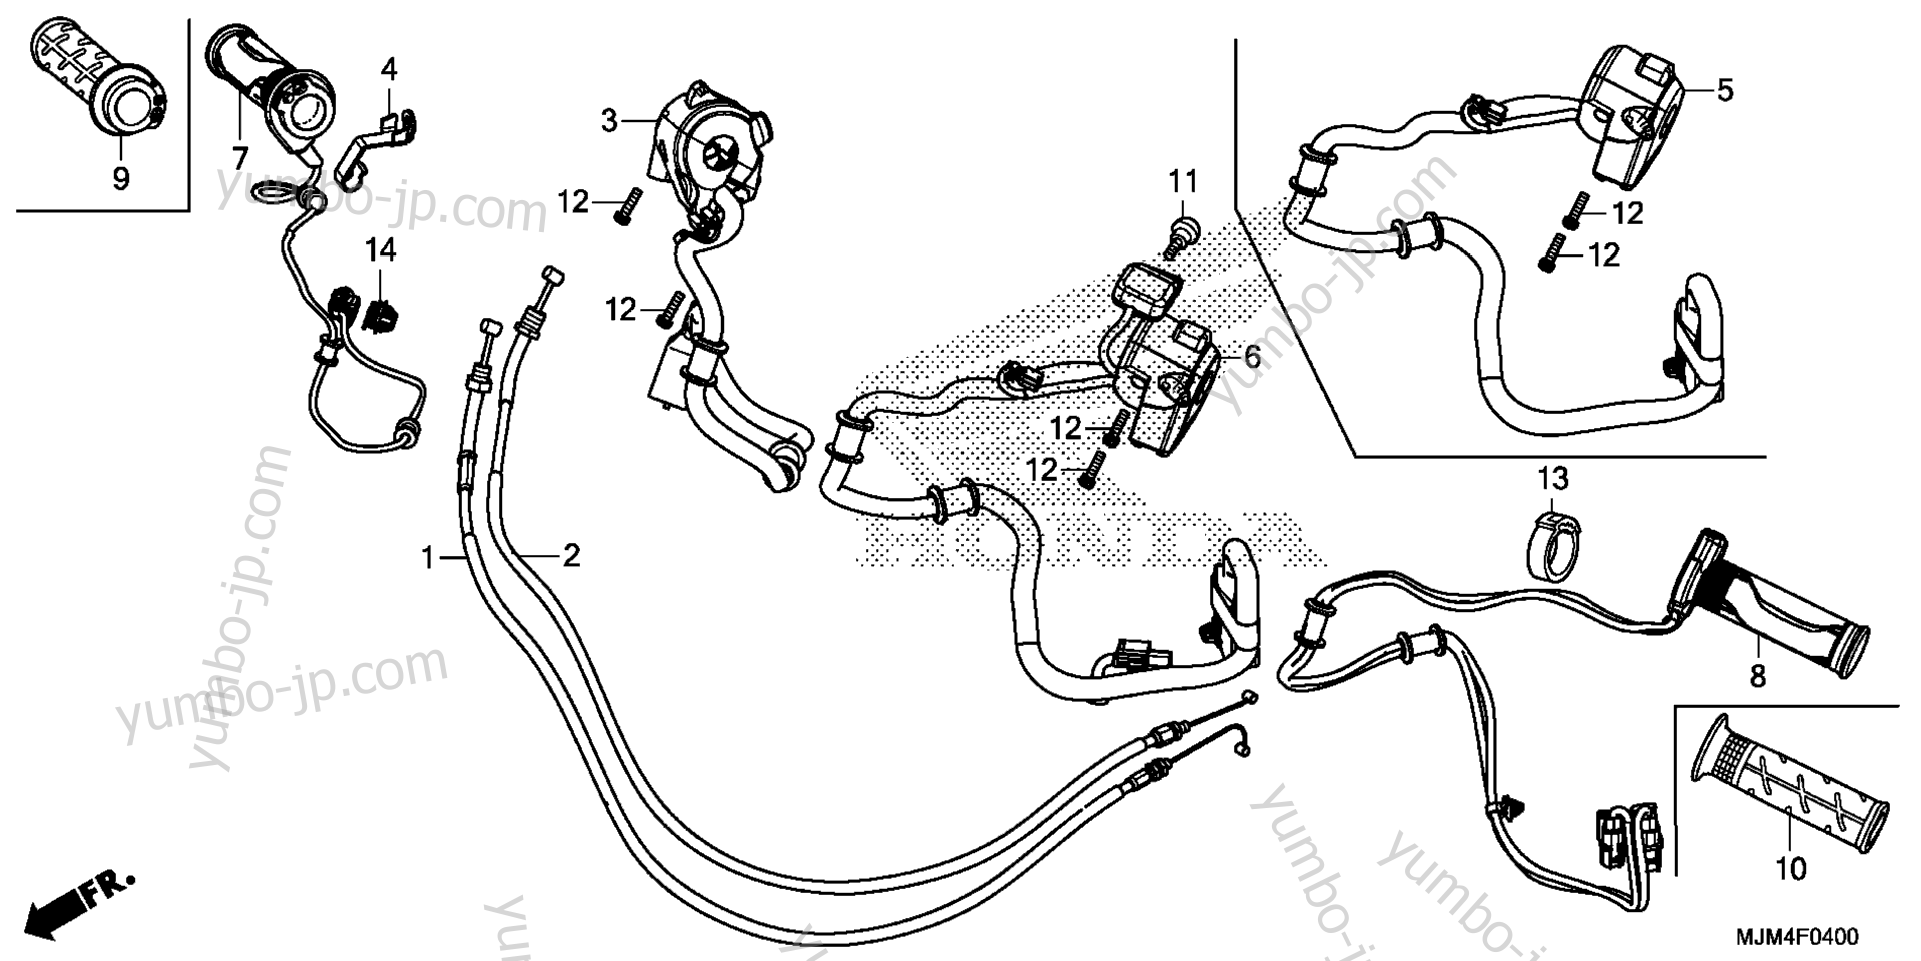 SWITCH / CABLE for motorcycles HONDA VFR800F AC 2014 year